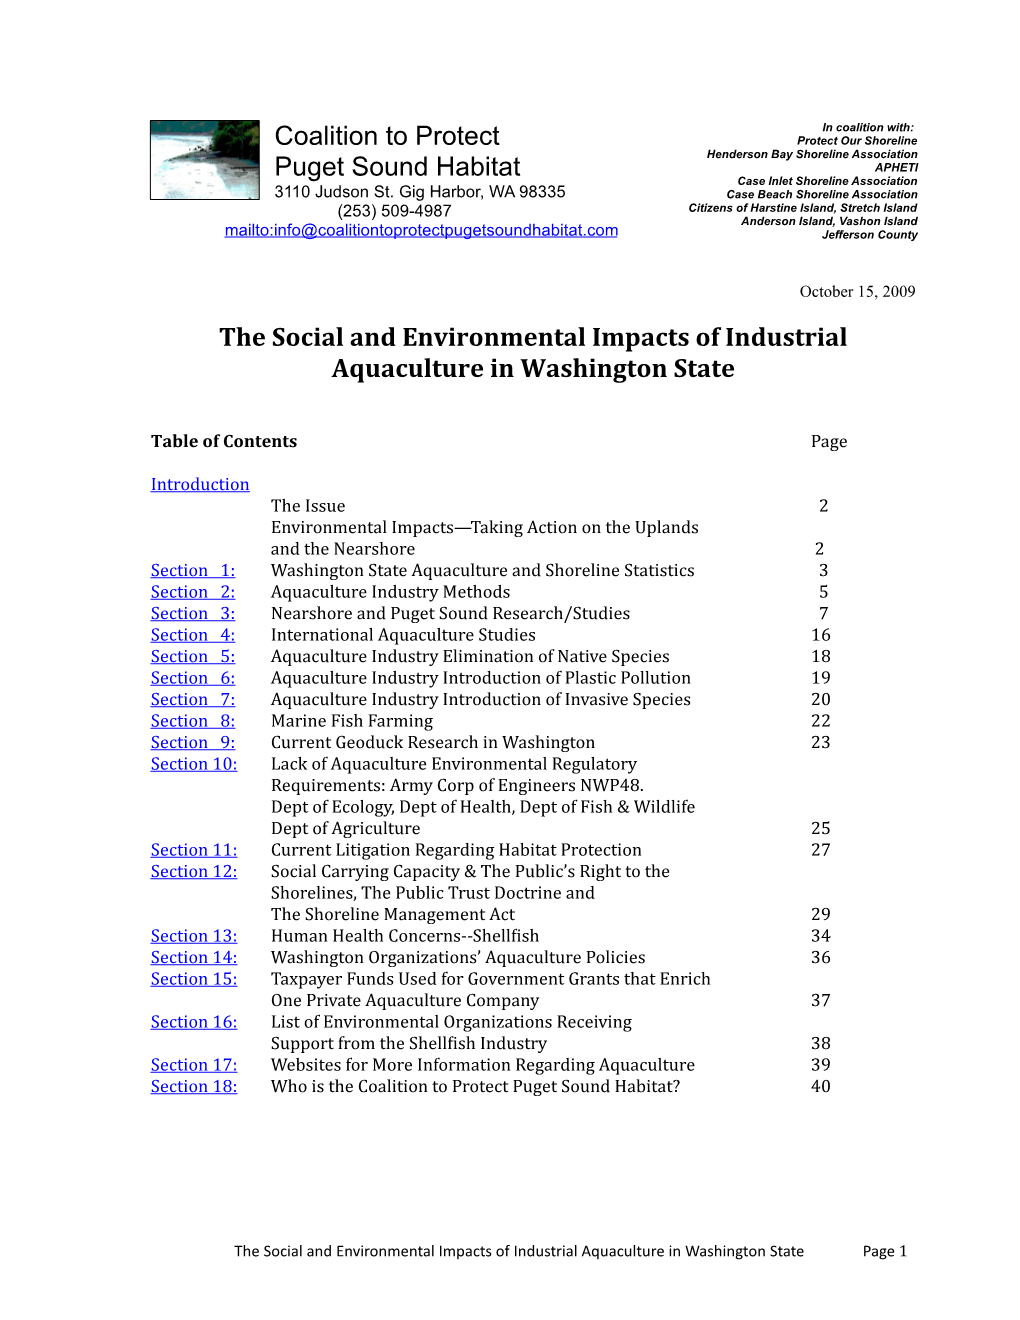 The Social and Environmental Impacts of Industrial Aquaculture in Washington State